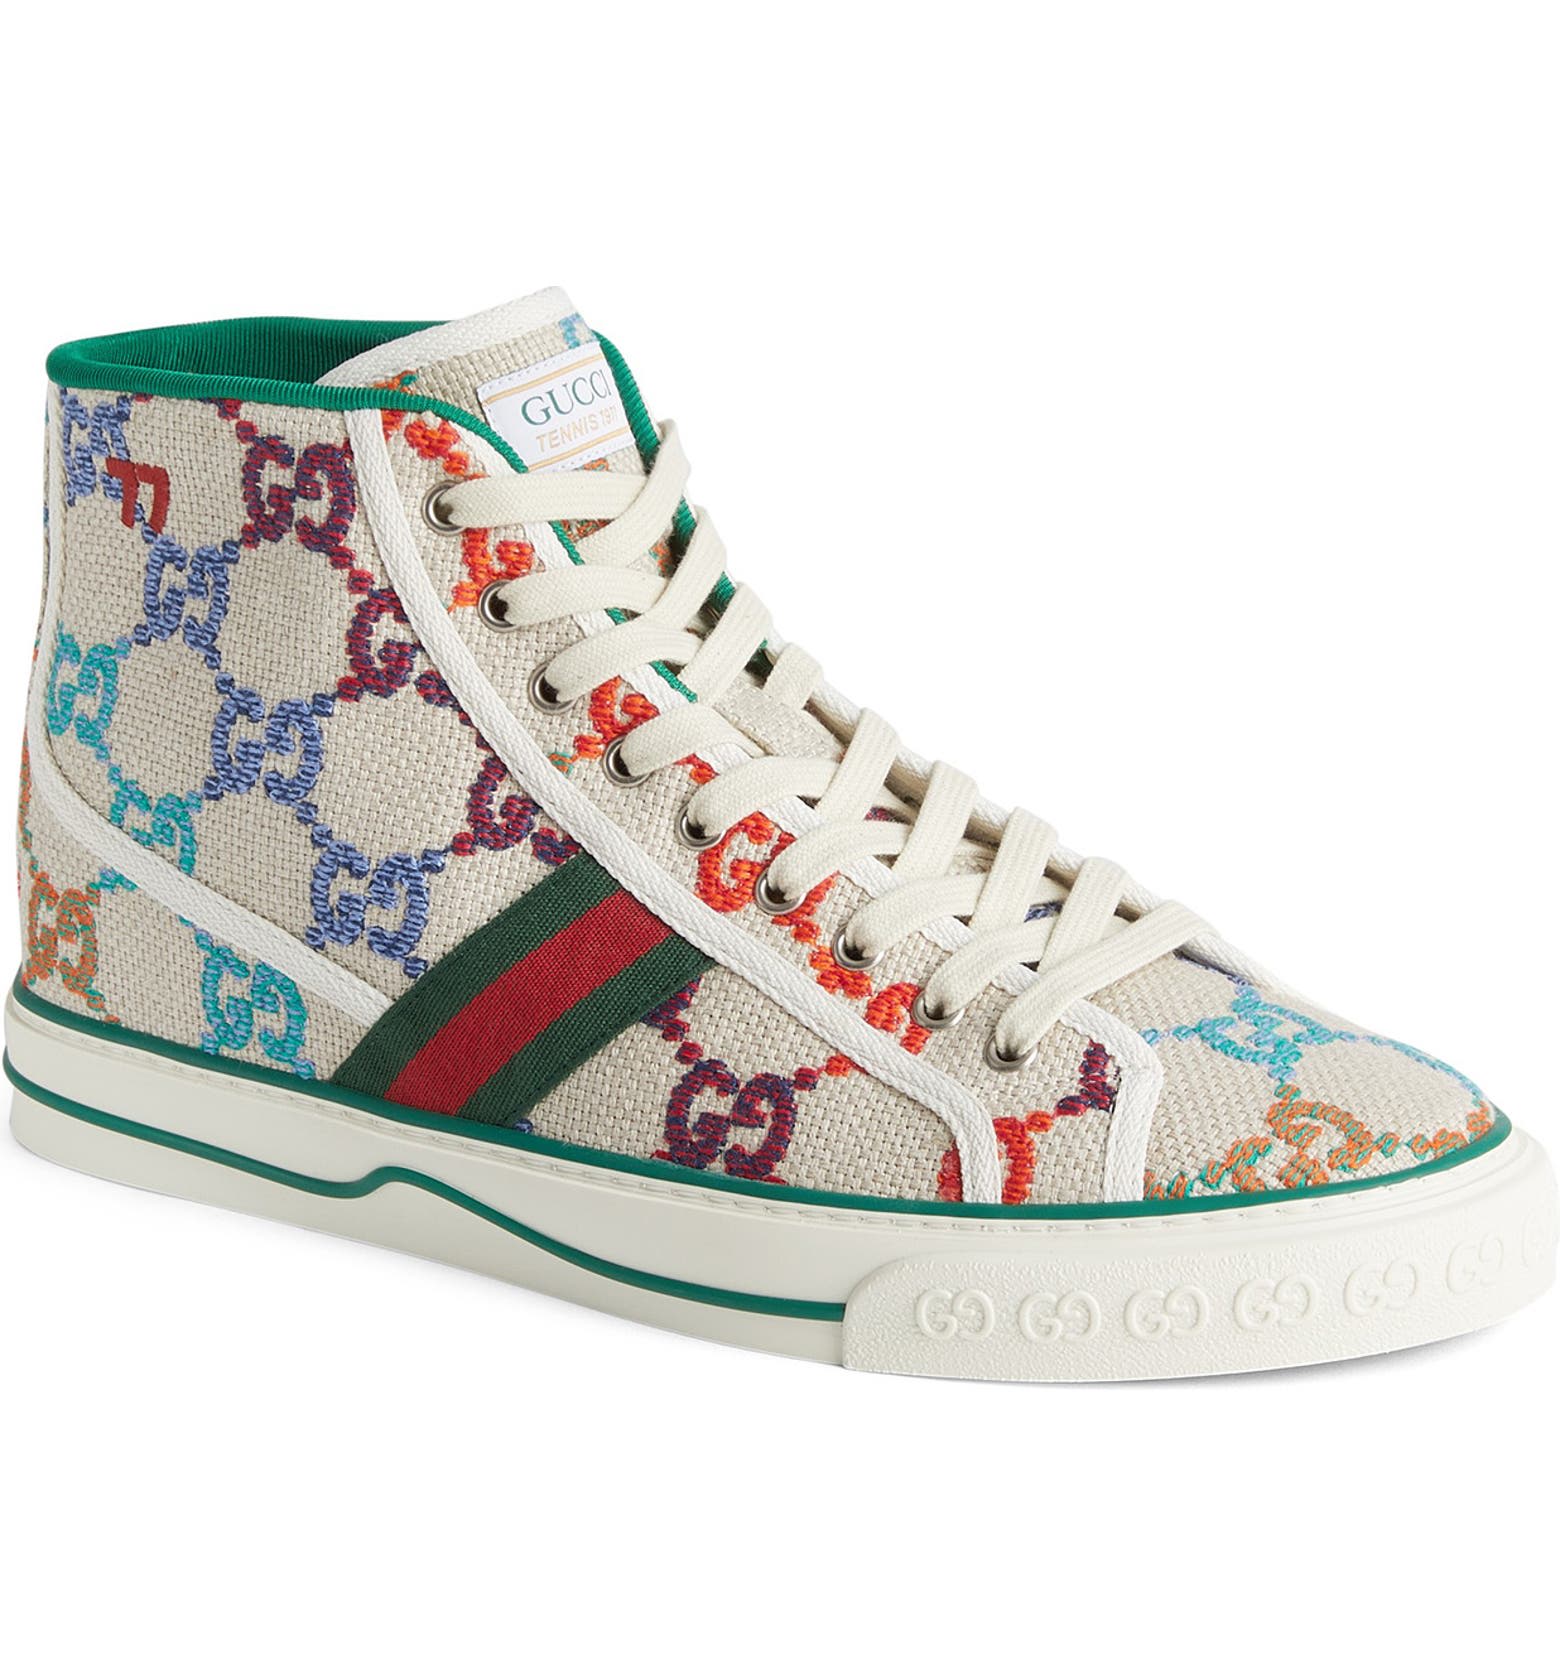 Nordstrom Gucci Sneakers